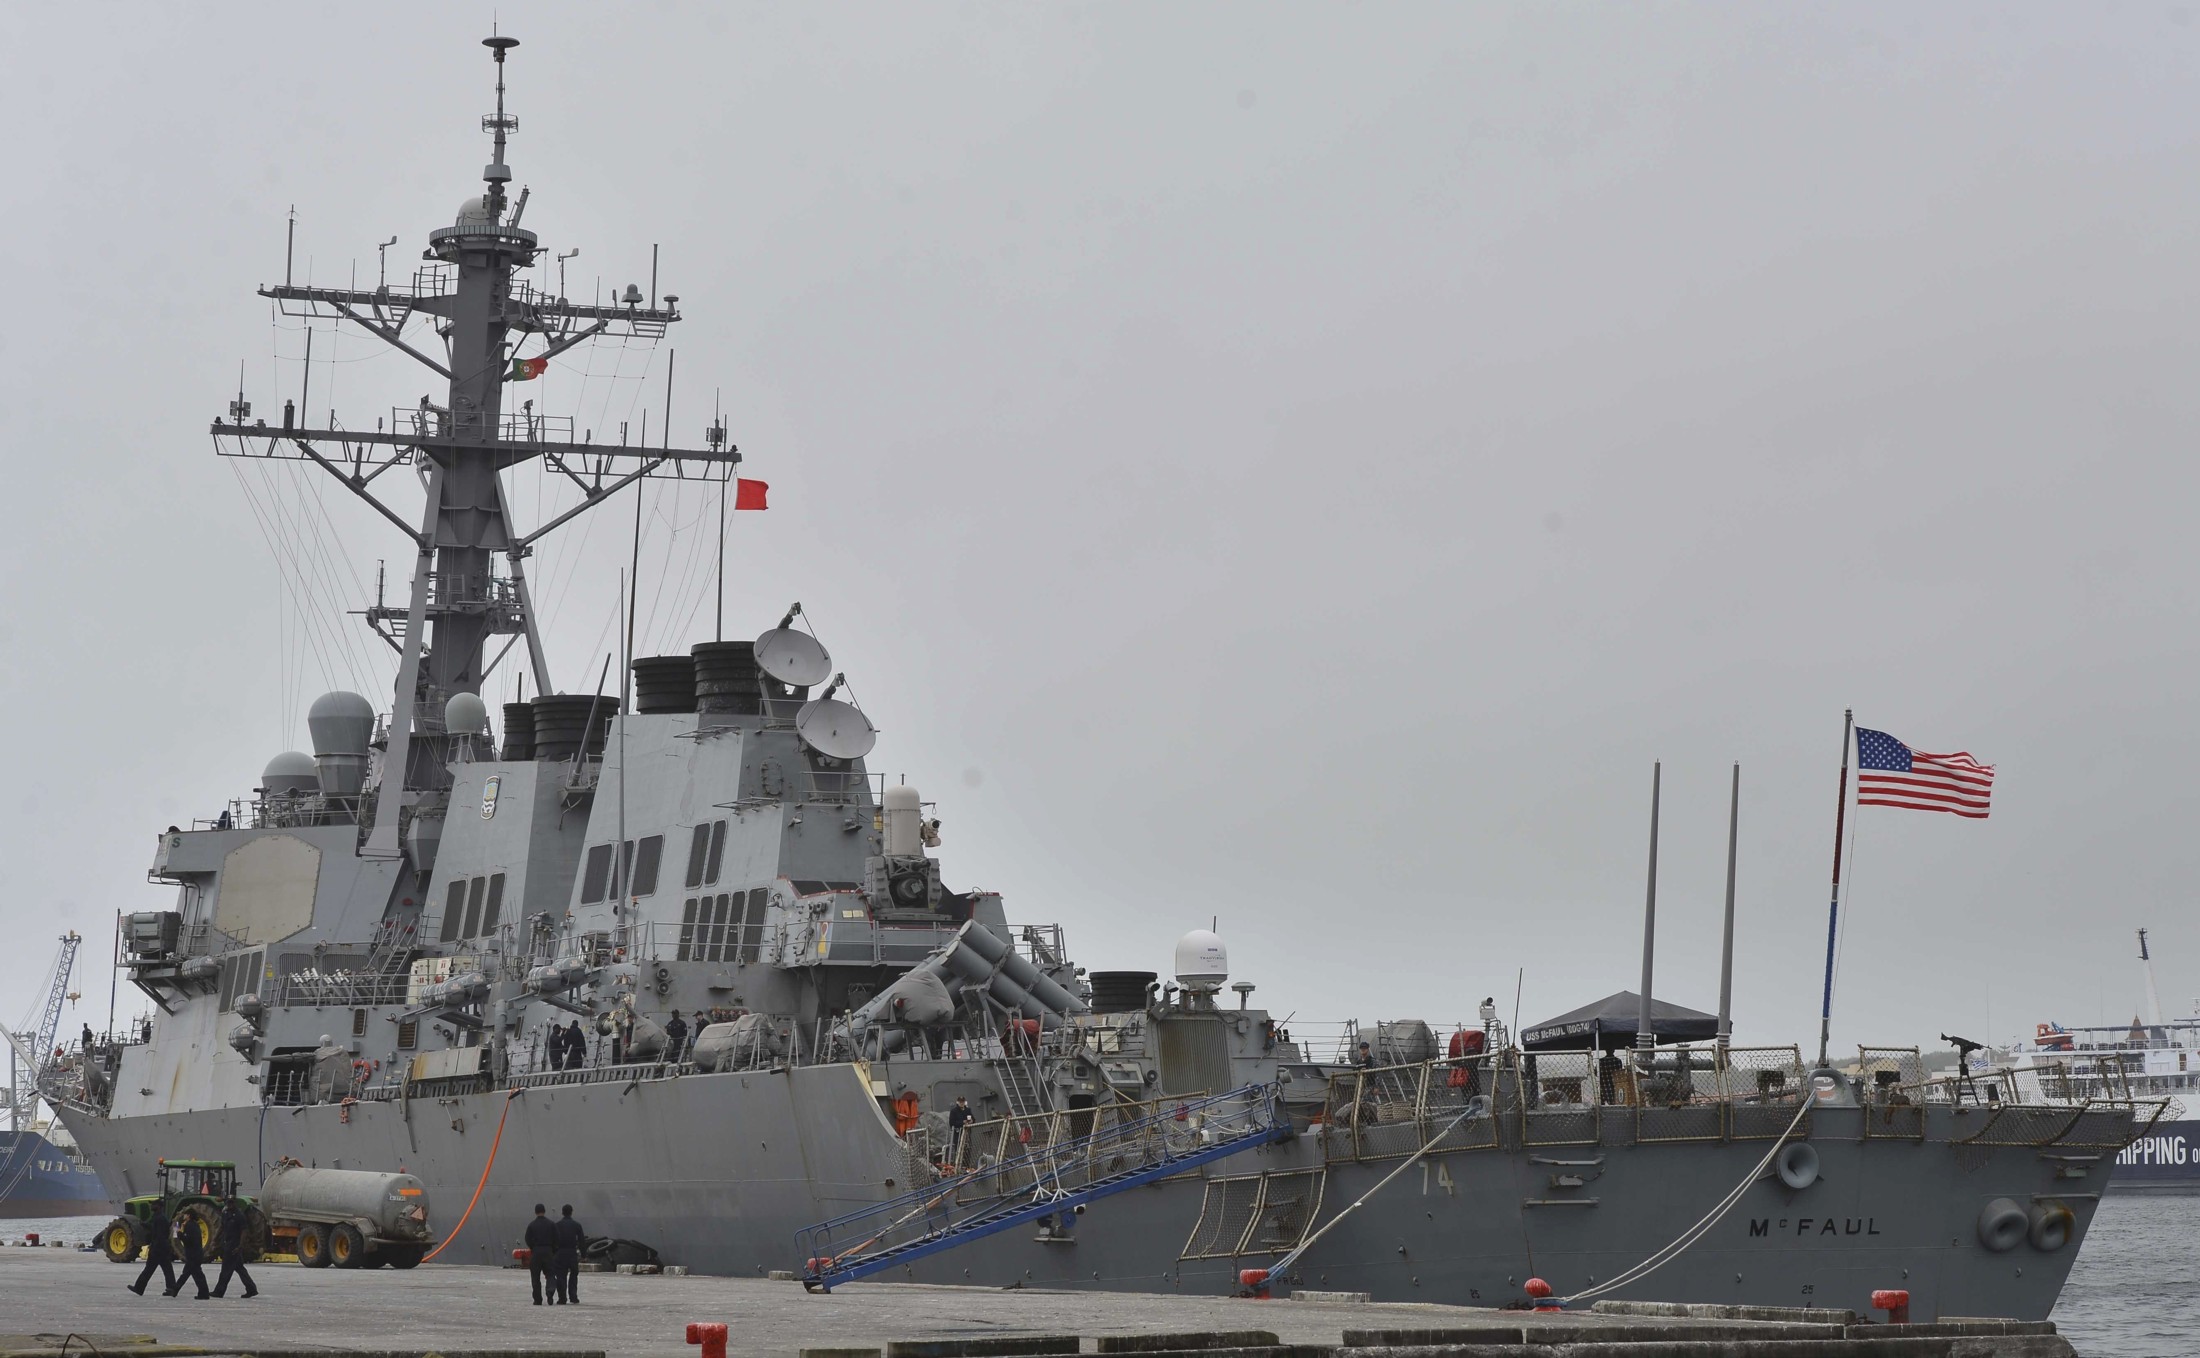 ddg-74 uss mcfaul guided missile destroyer ponta delgada azores portugal 87